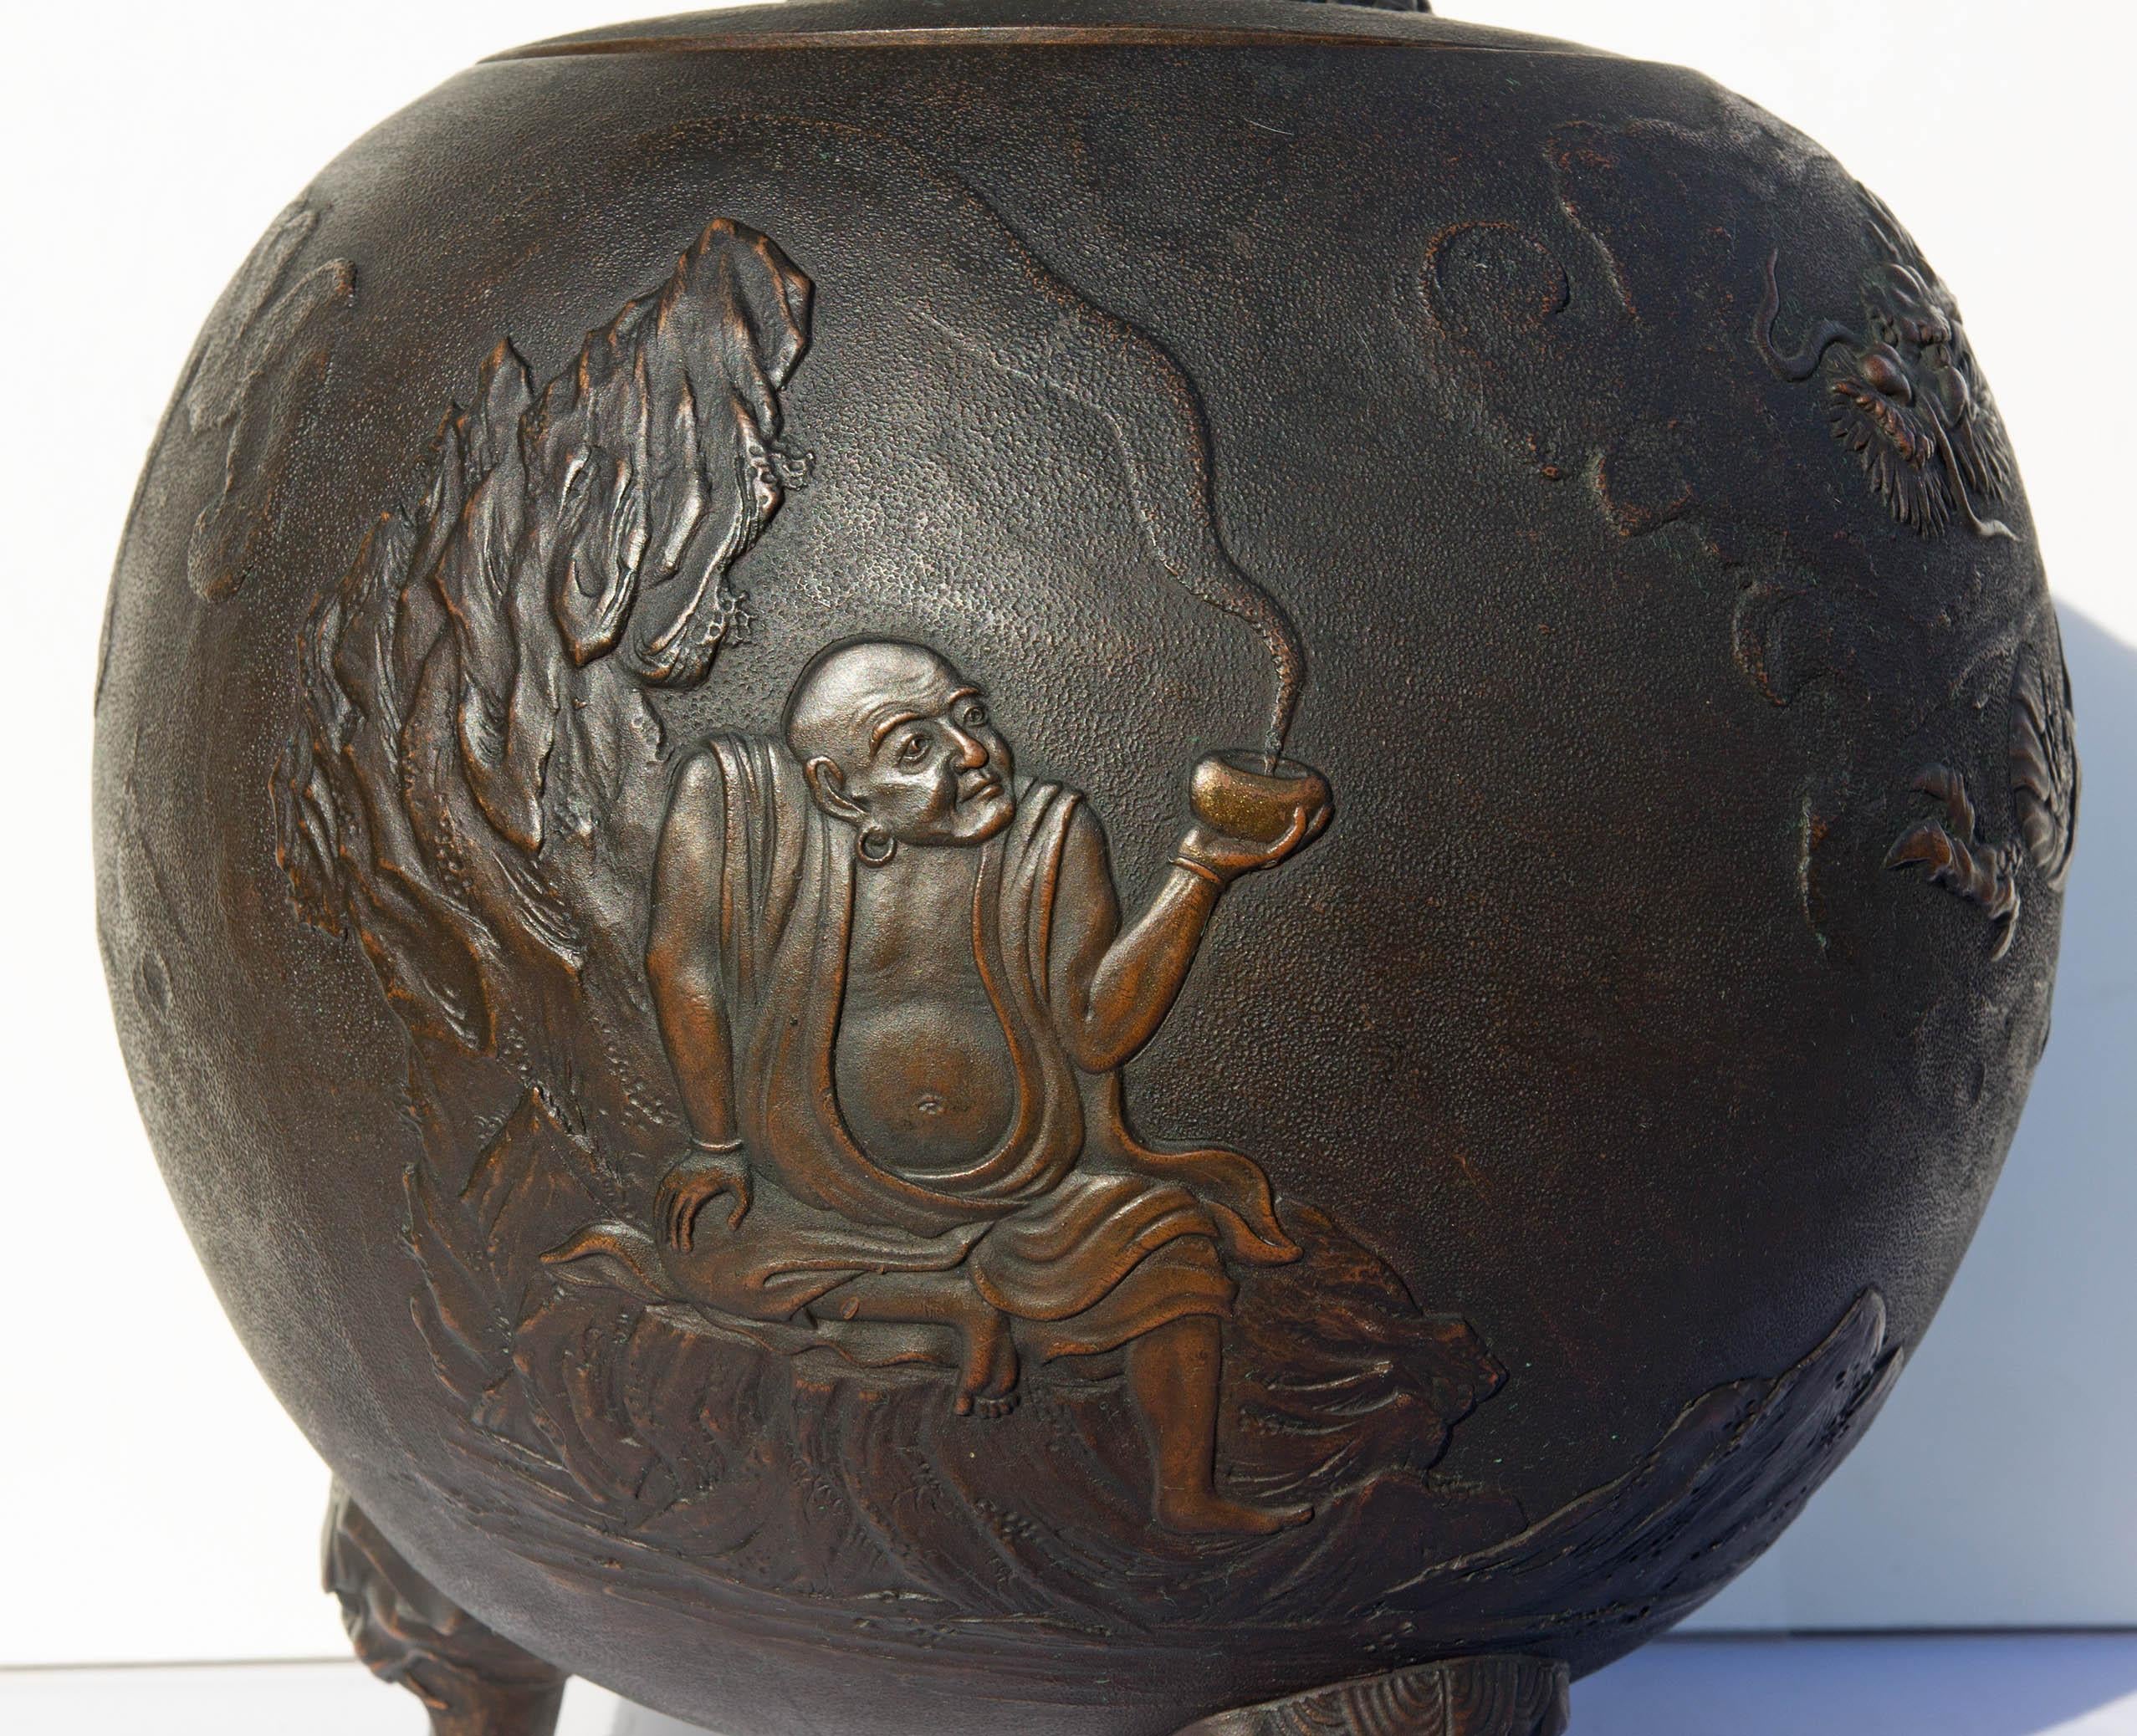 Antique Japanese covered jar. Scenic decoration with a scholar, dragon and foo dog. Bronze clad ceramic. Rich patina. Meiji period, circa 1900-1920.